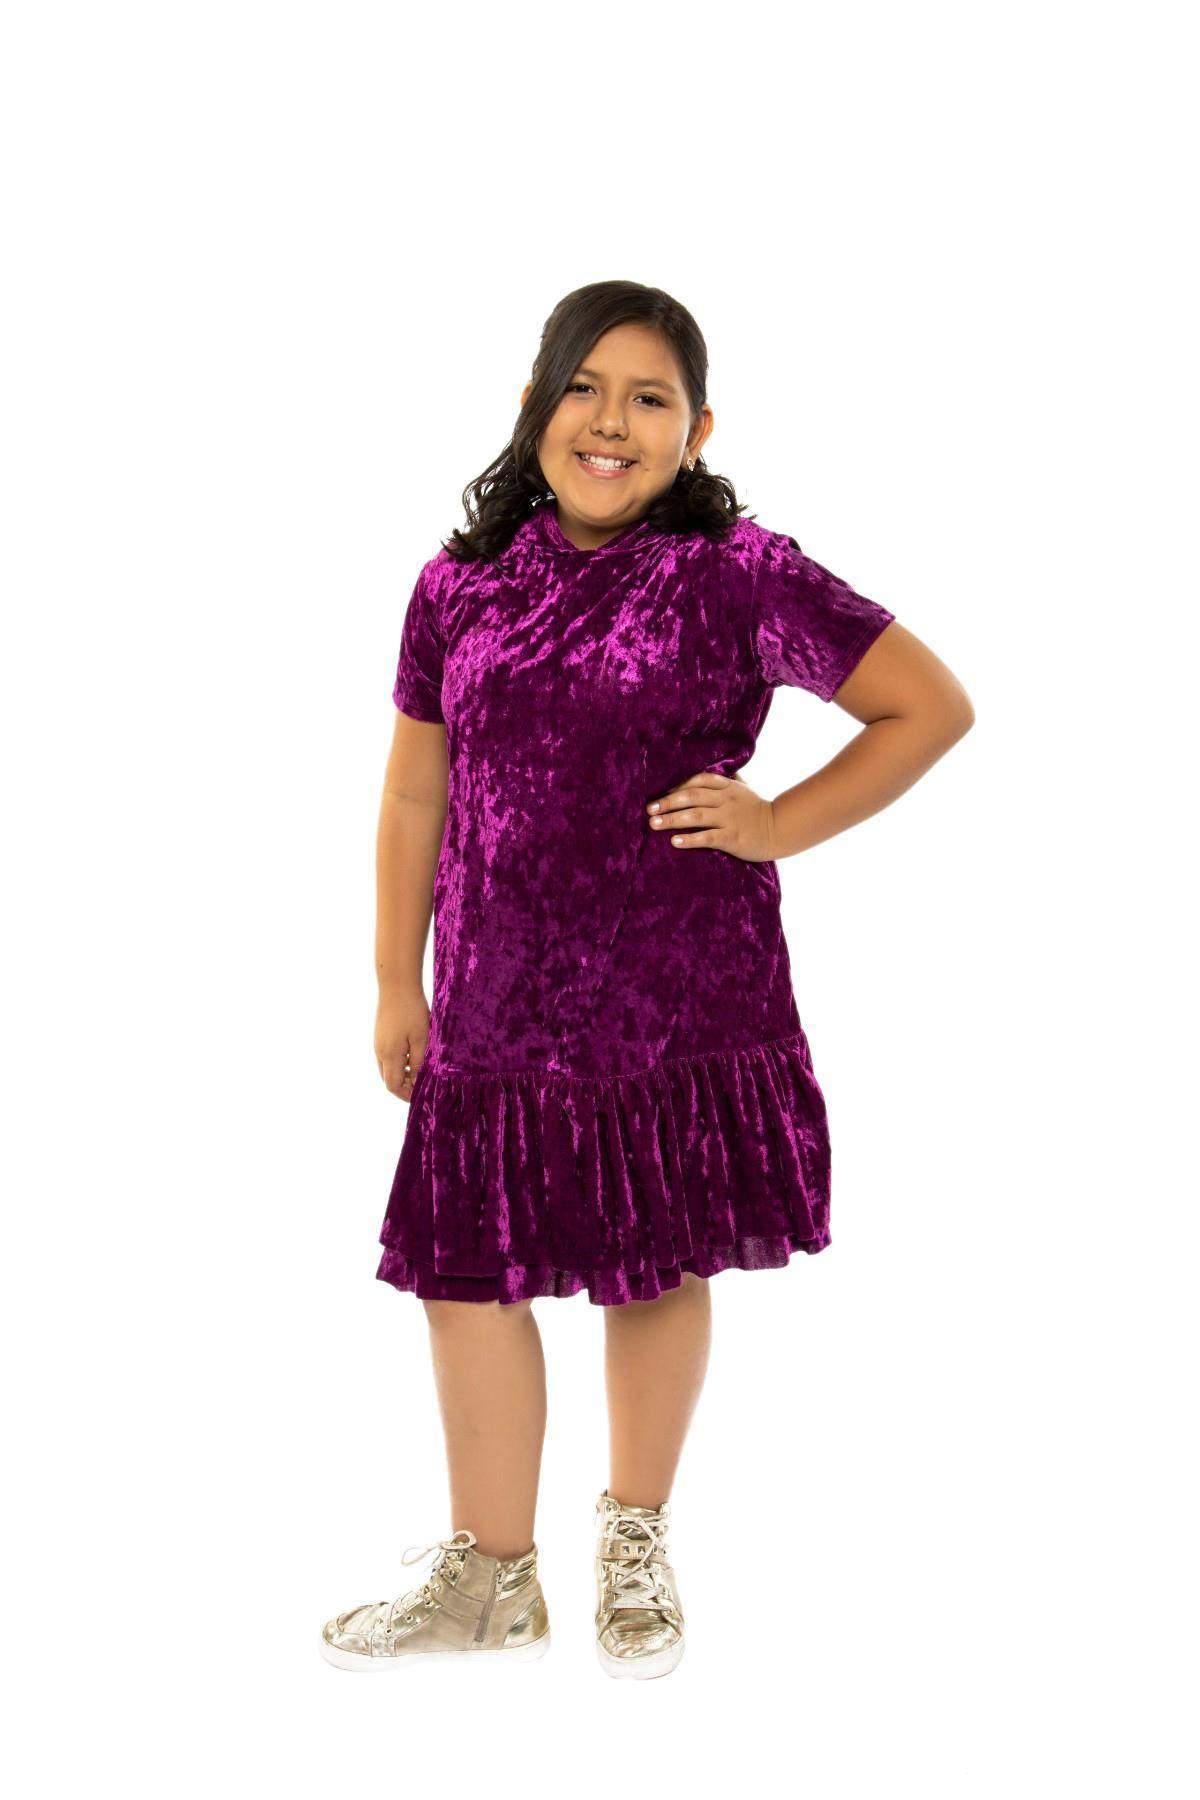 Hoodie Ruffle Plus Size Girl Dress-Kid's Dream-color_Burgundy,color_Dusty Rose,Color_Eggplant,Color_Green,color_Royal Blue,color_Teal Blue,fabric_Velvet,length_Knee Length,Pink-collection,size _18.5,size_14.5,size_16.5